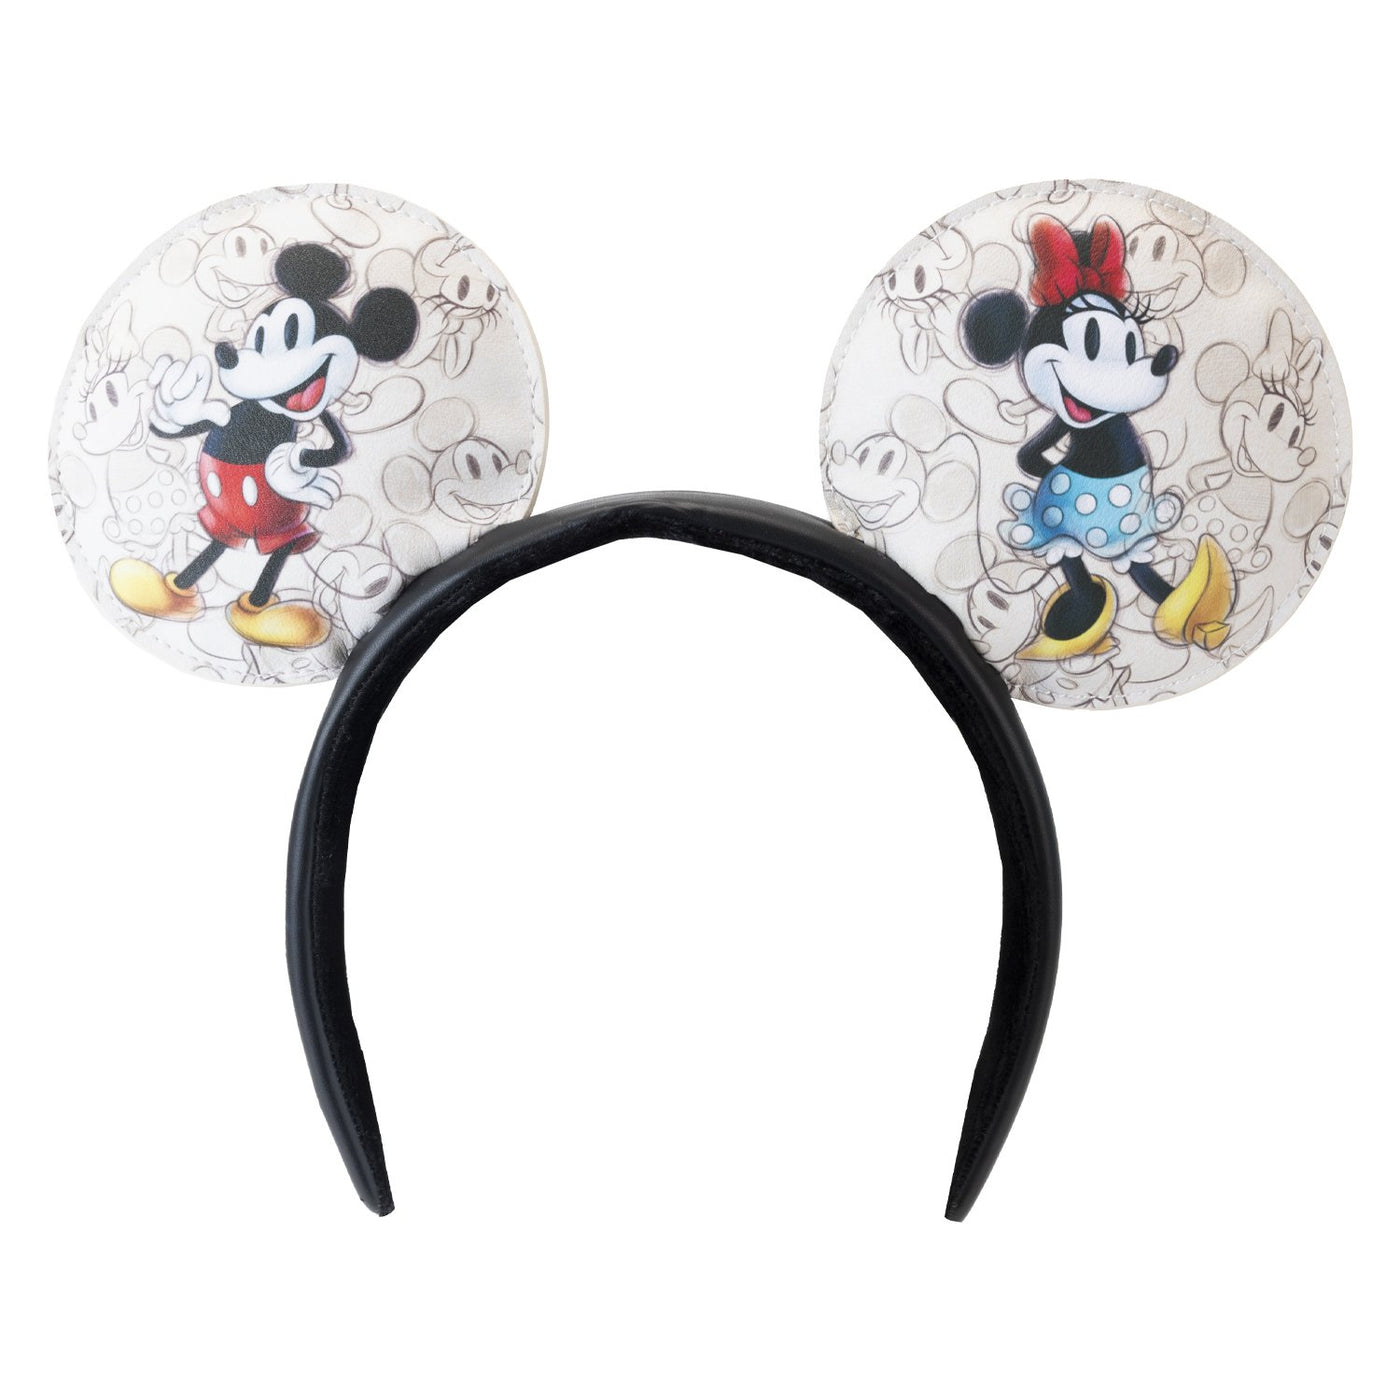 671803468047 - Loungefly Disney 100th Anniversary Sketchbook Ears Headband - Removable Bow